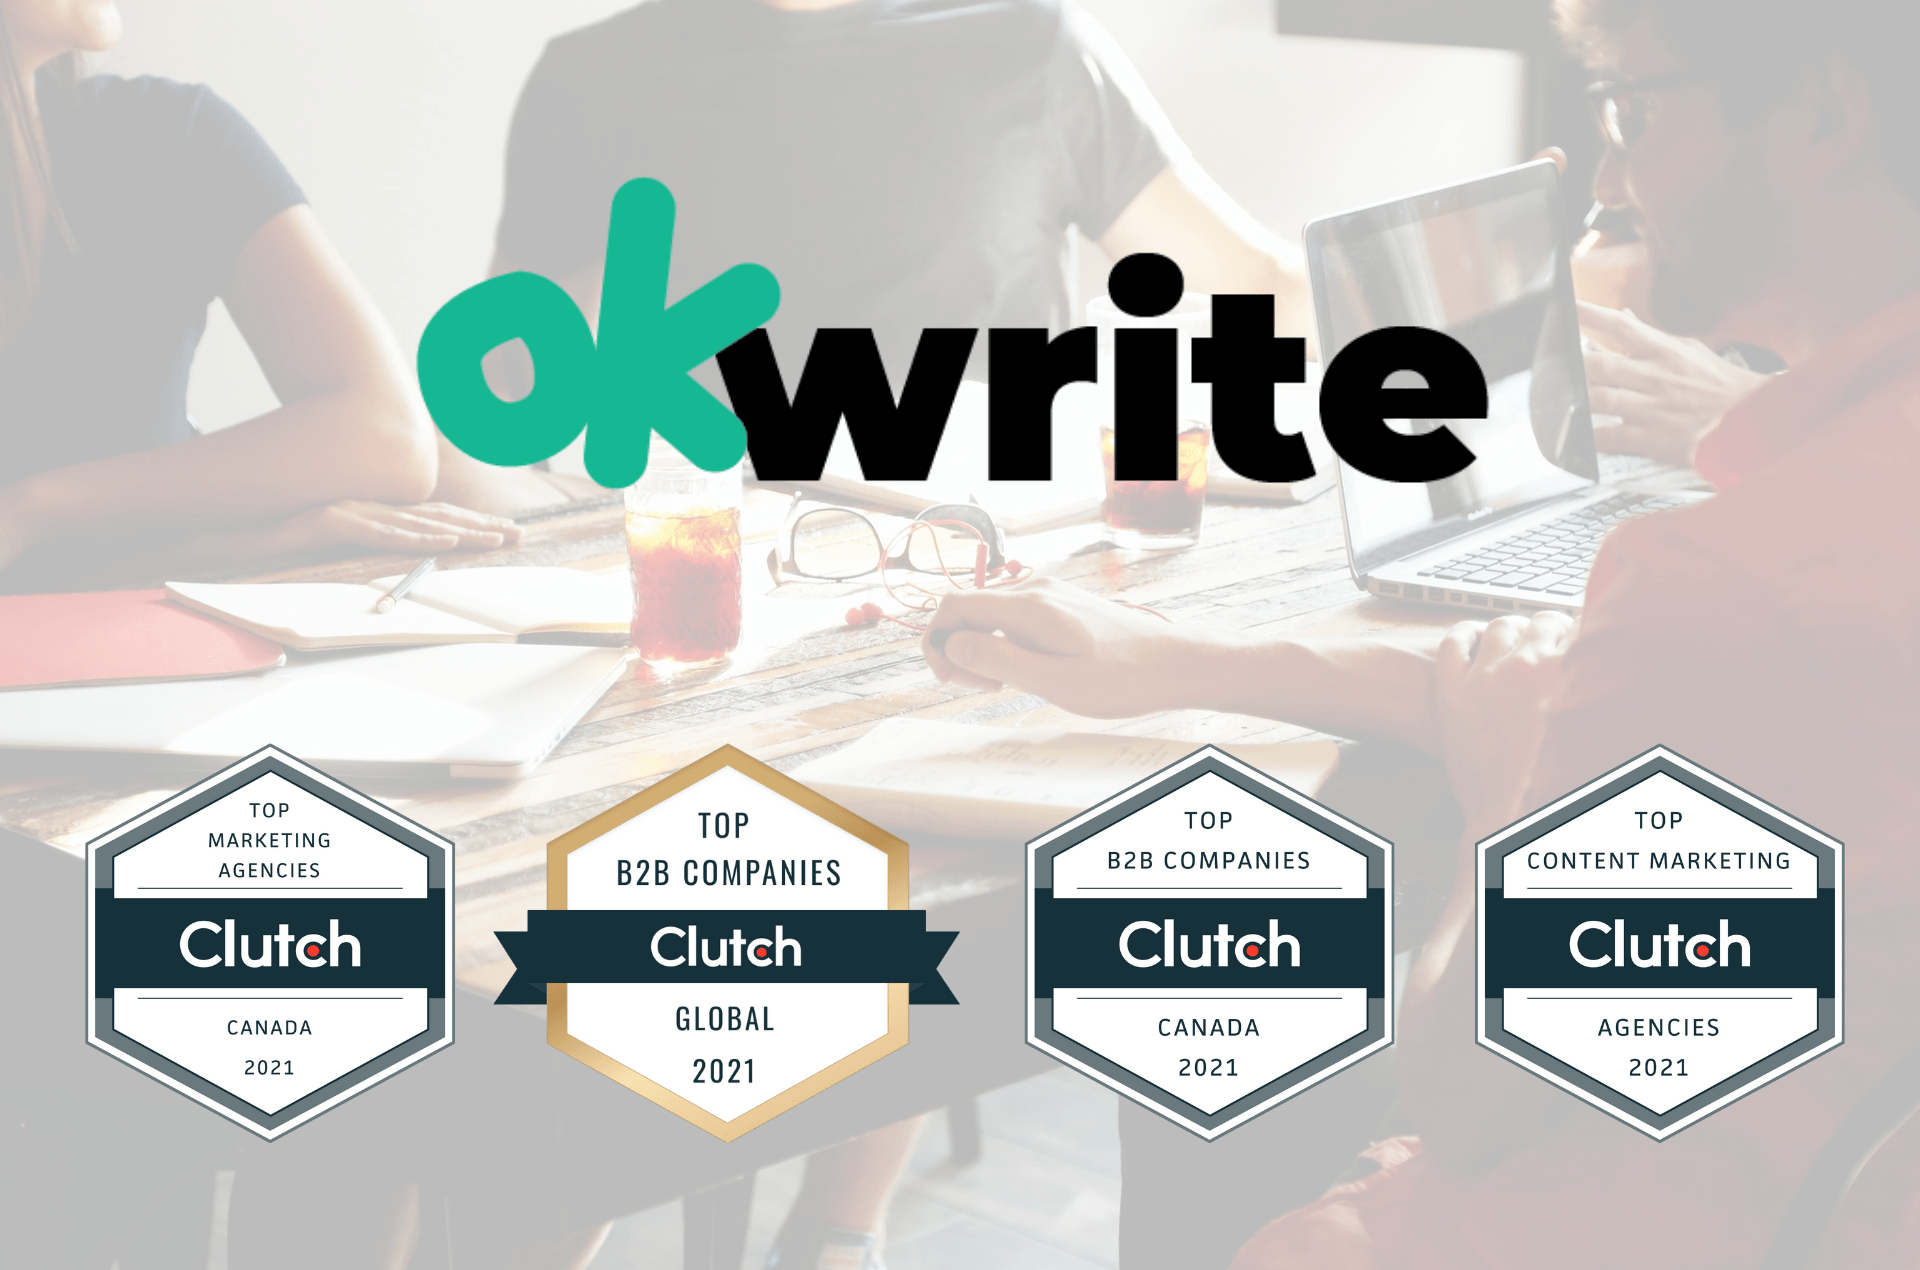 okwrite Ranked a TOP Content Marketing Agency in the WORLD (and #1 in Canada)